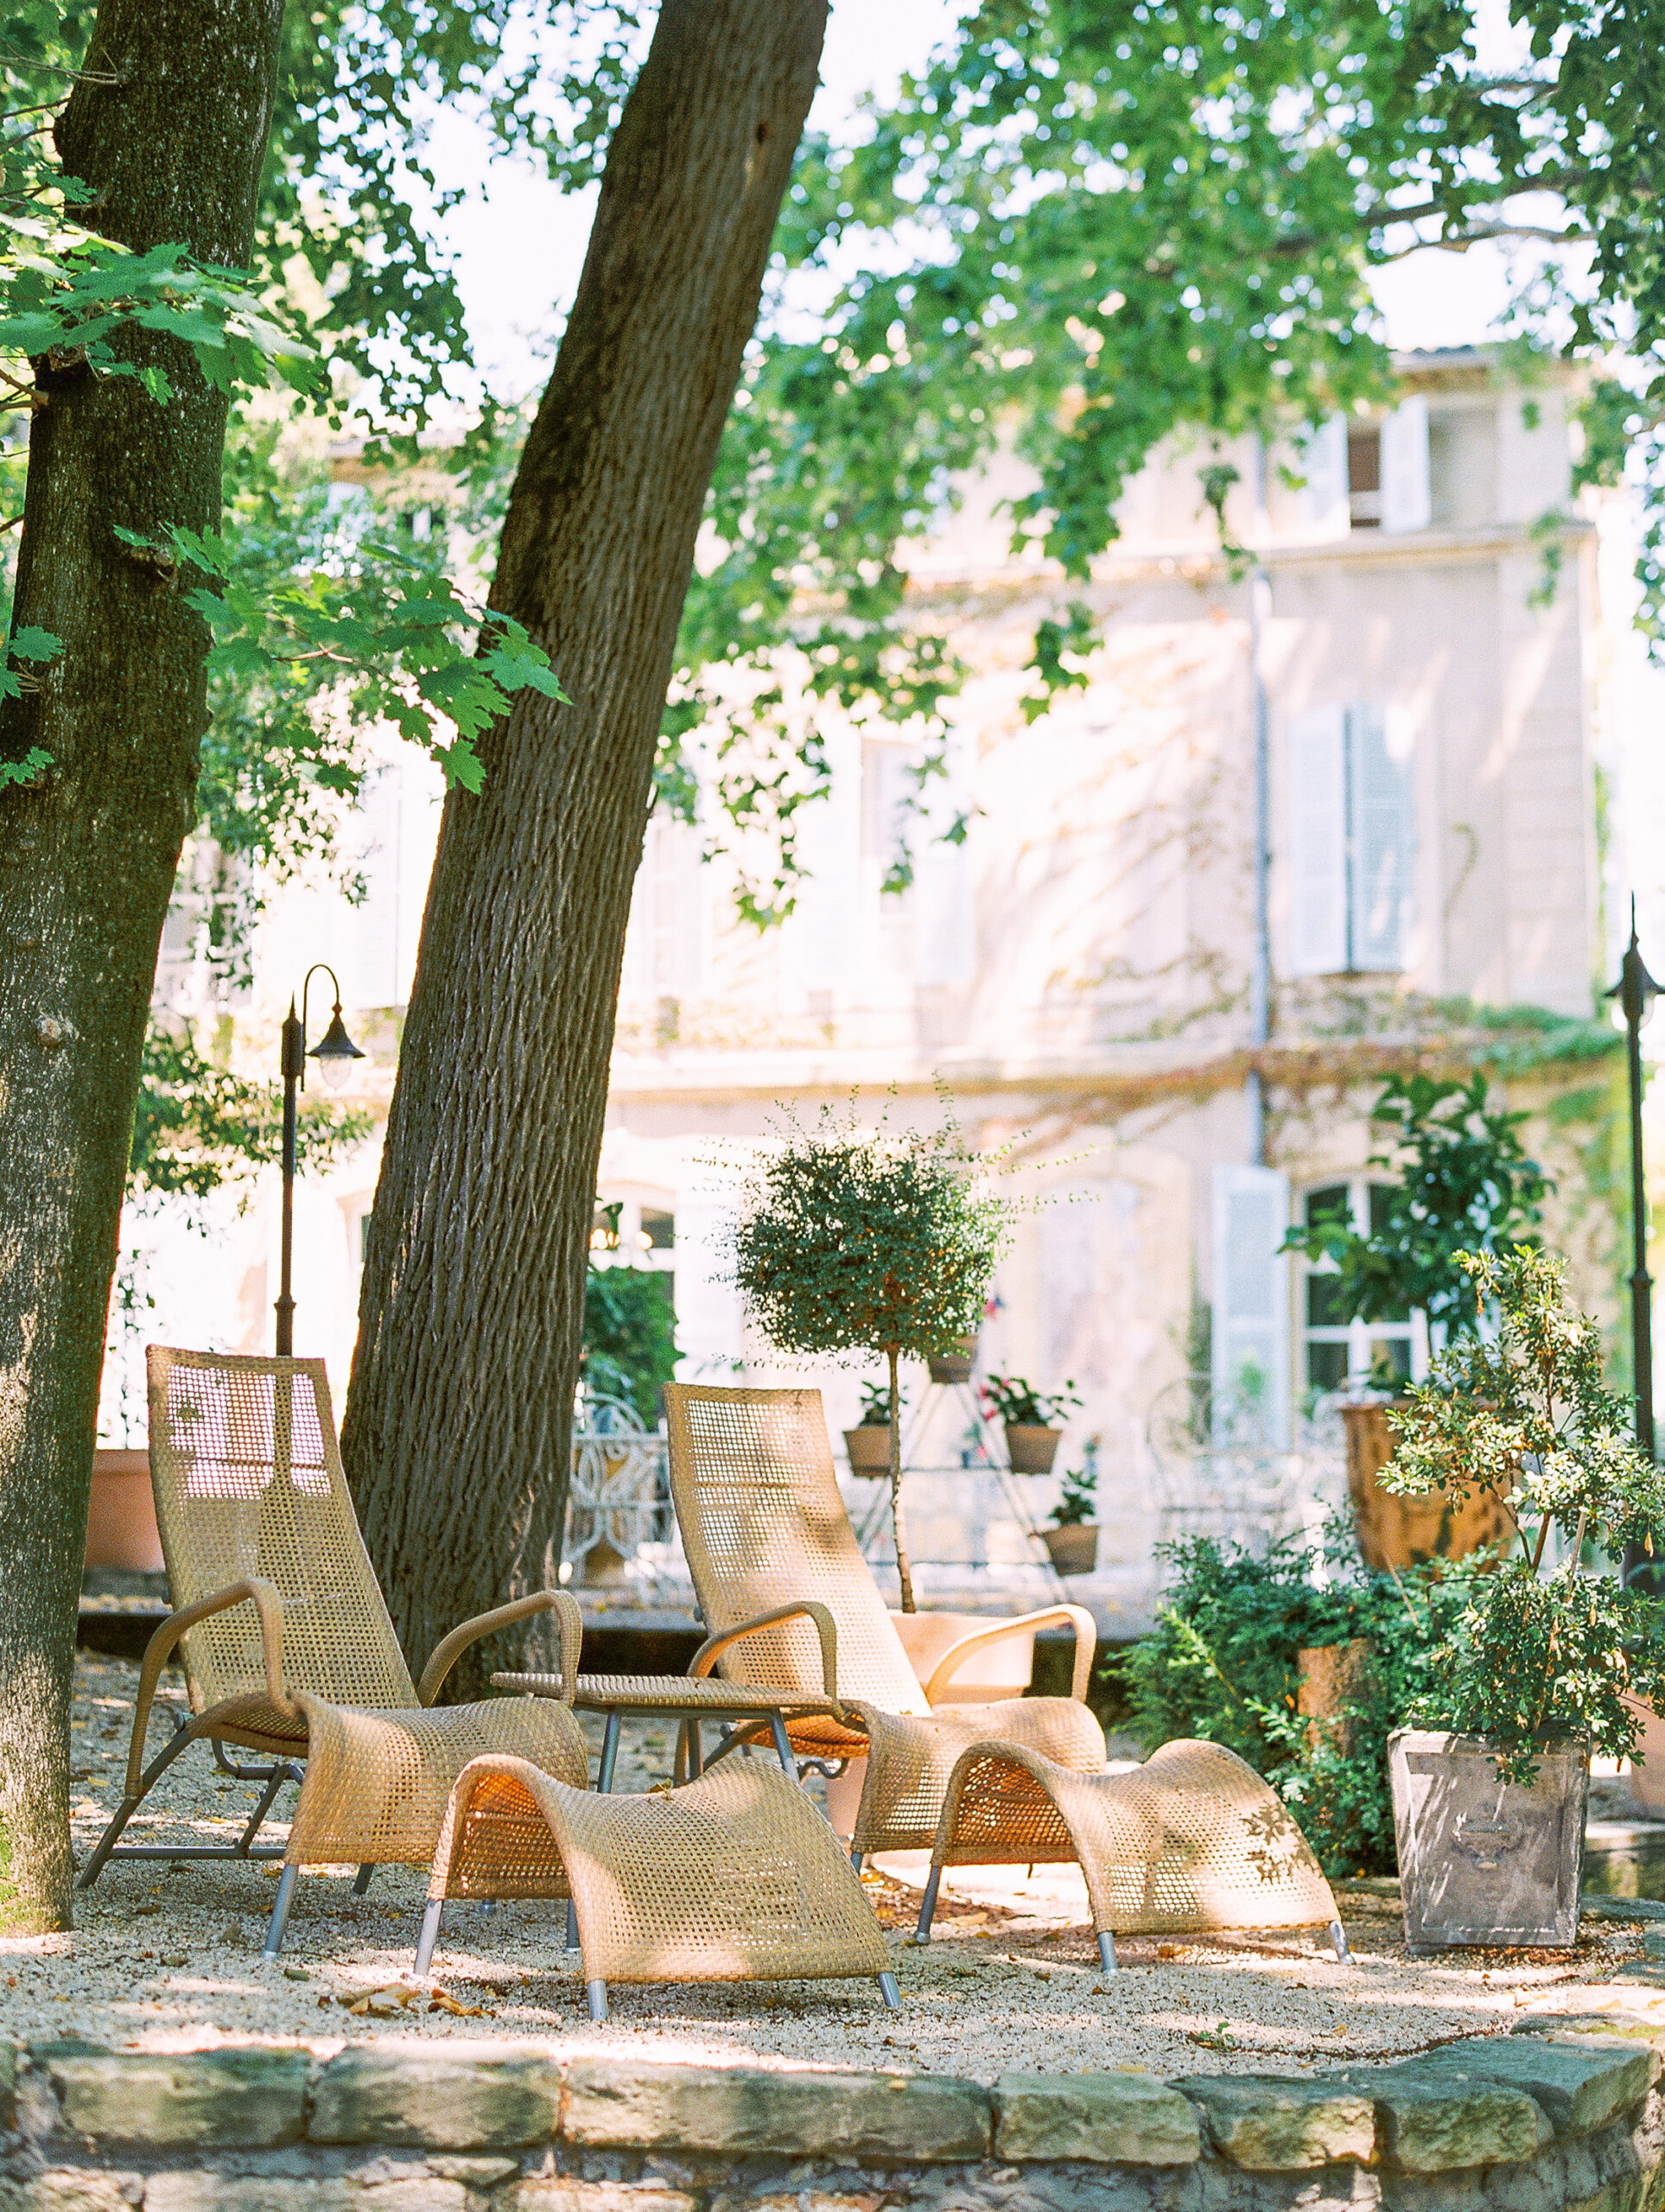 summer in provence louge chairs under dappled sunlight with large shady trees